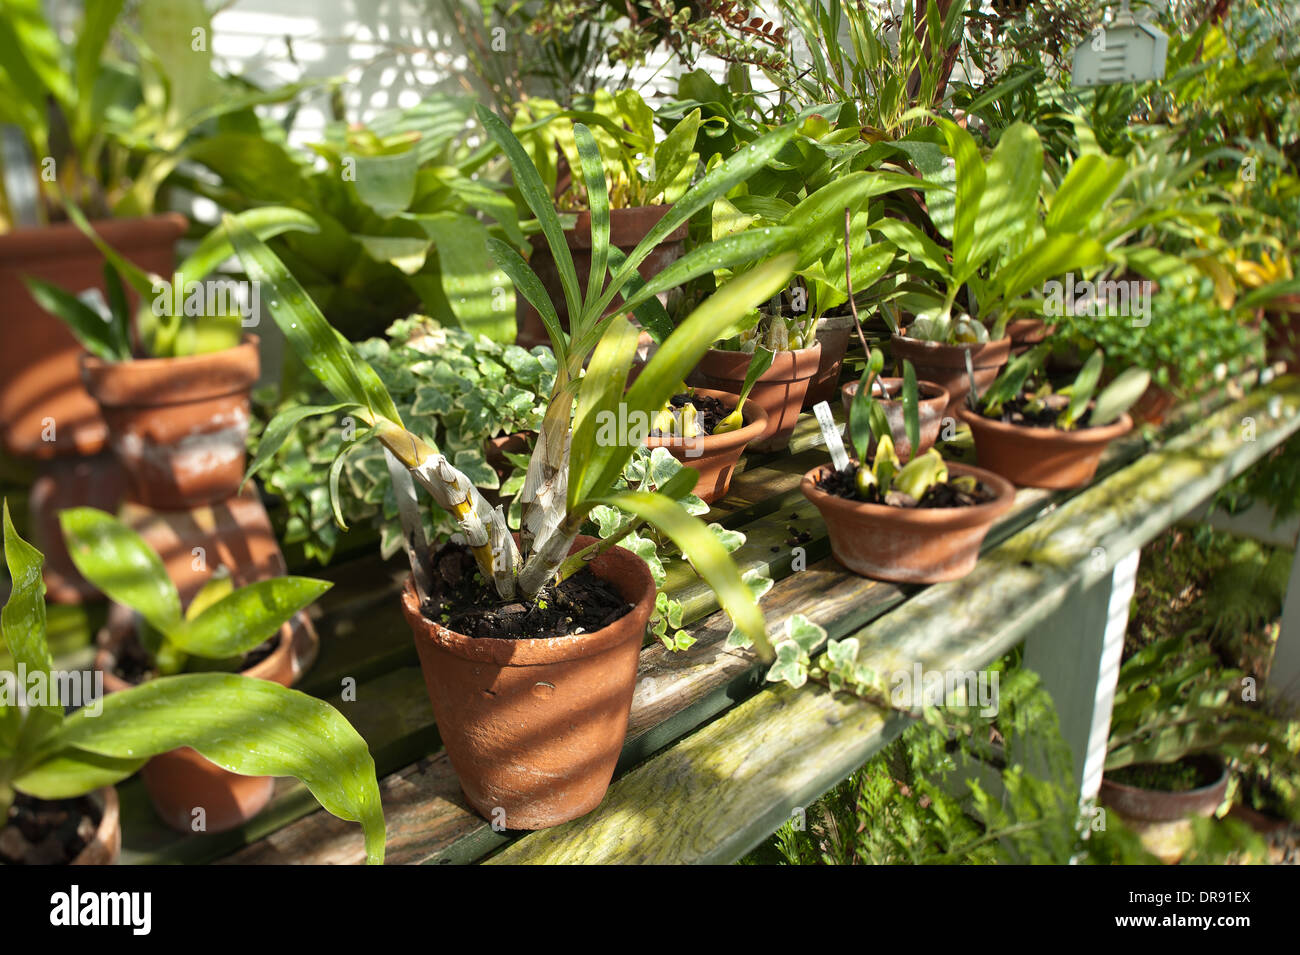 slightly diffused lighting inside a greenhouse slatted blinds shadows on work bench top tropical ferns orchids in clay flowerpot Stock Photo